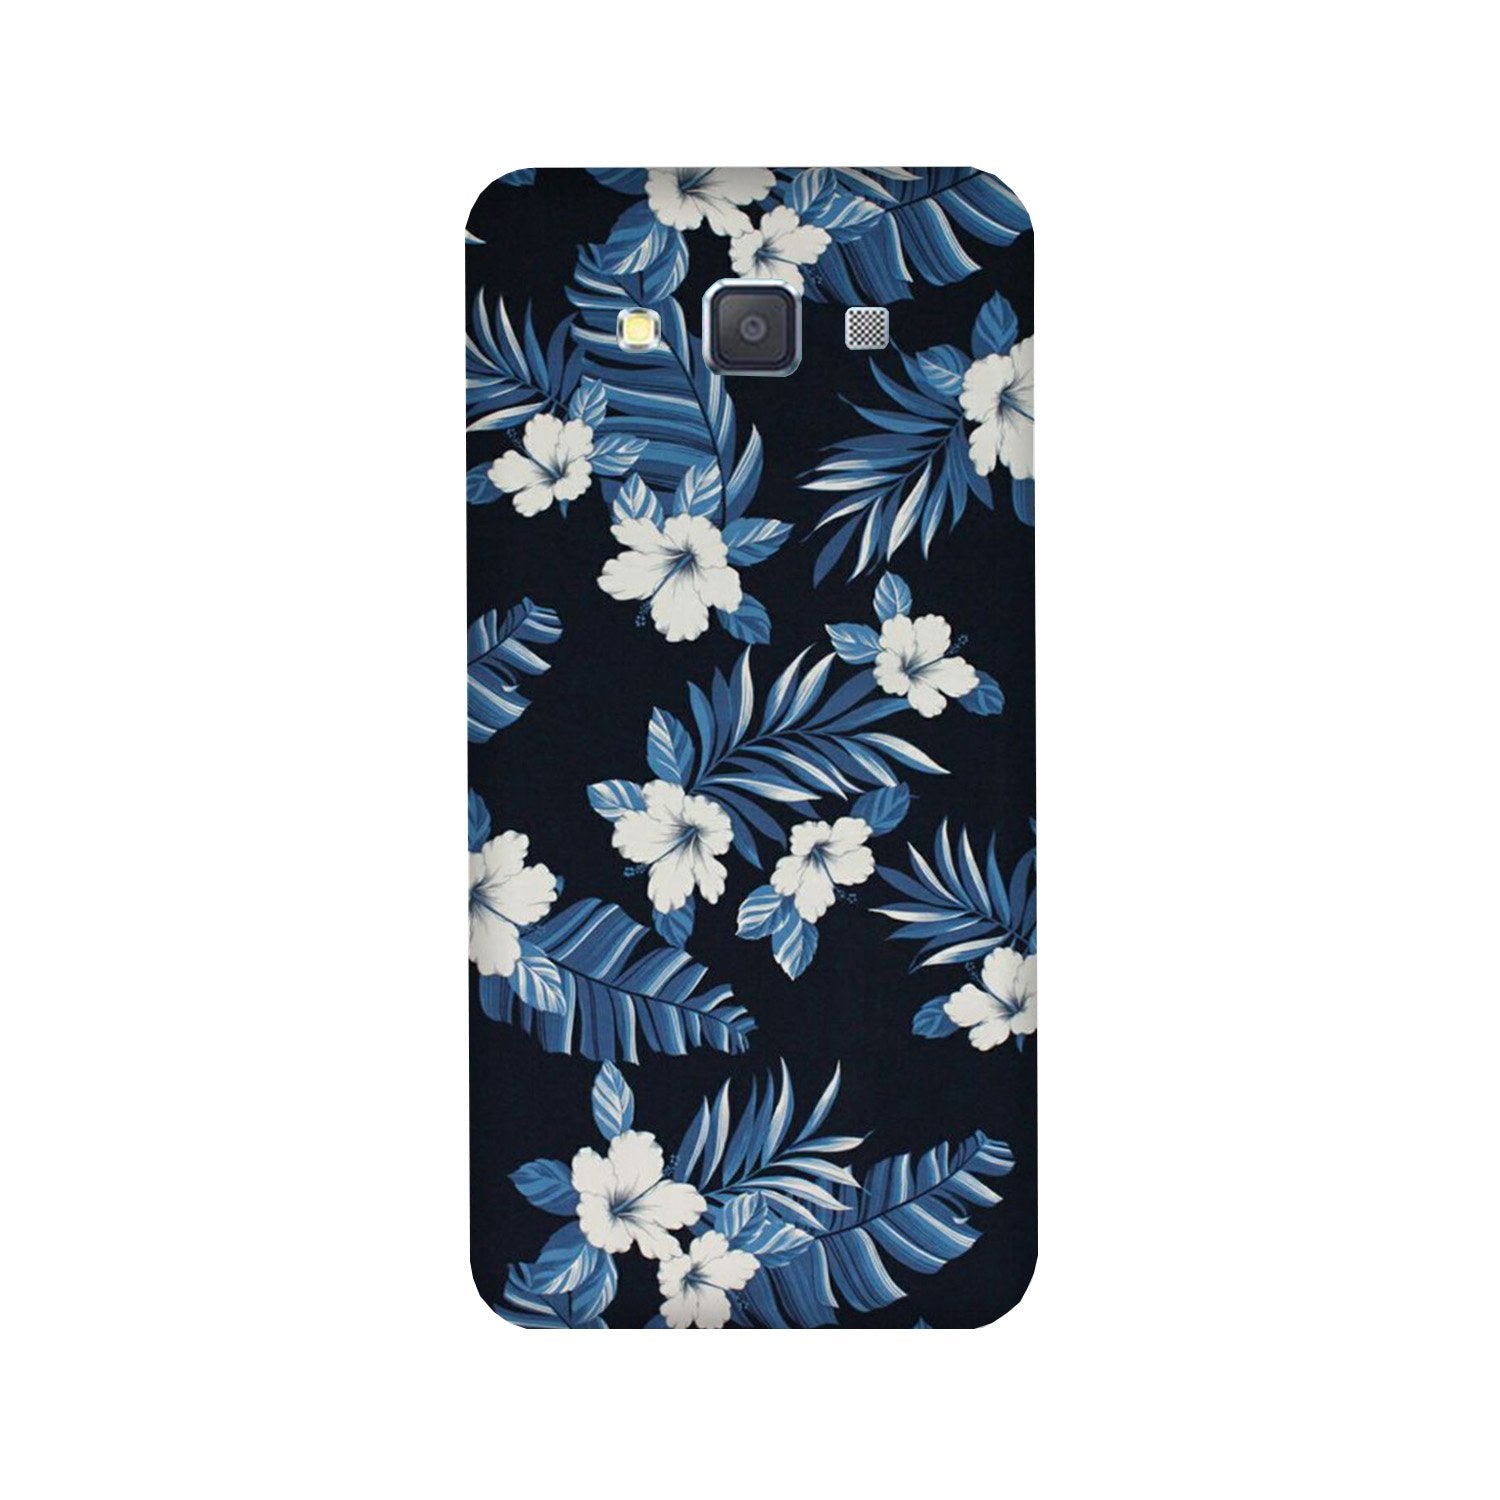 White flowers Blue Background2 Case for Galaxy ON7/ON7 Pro